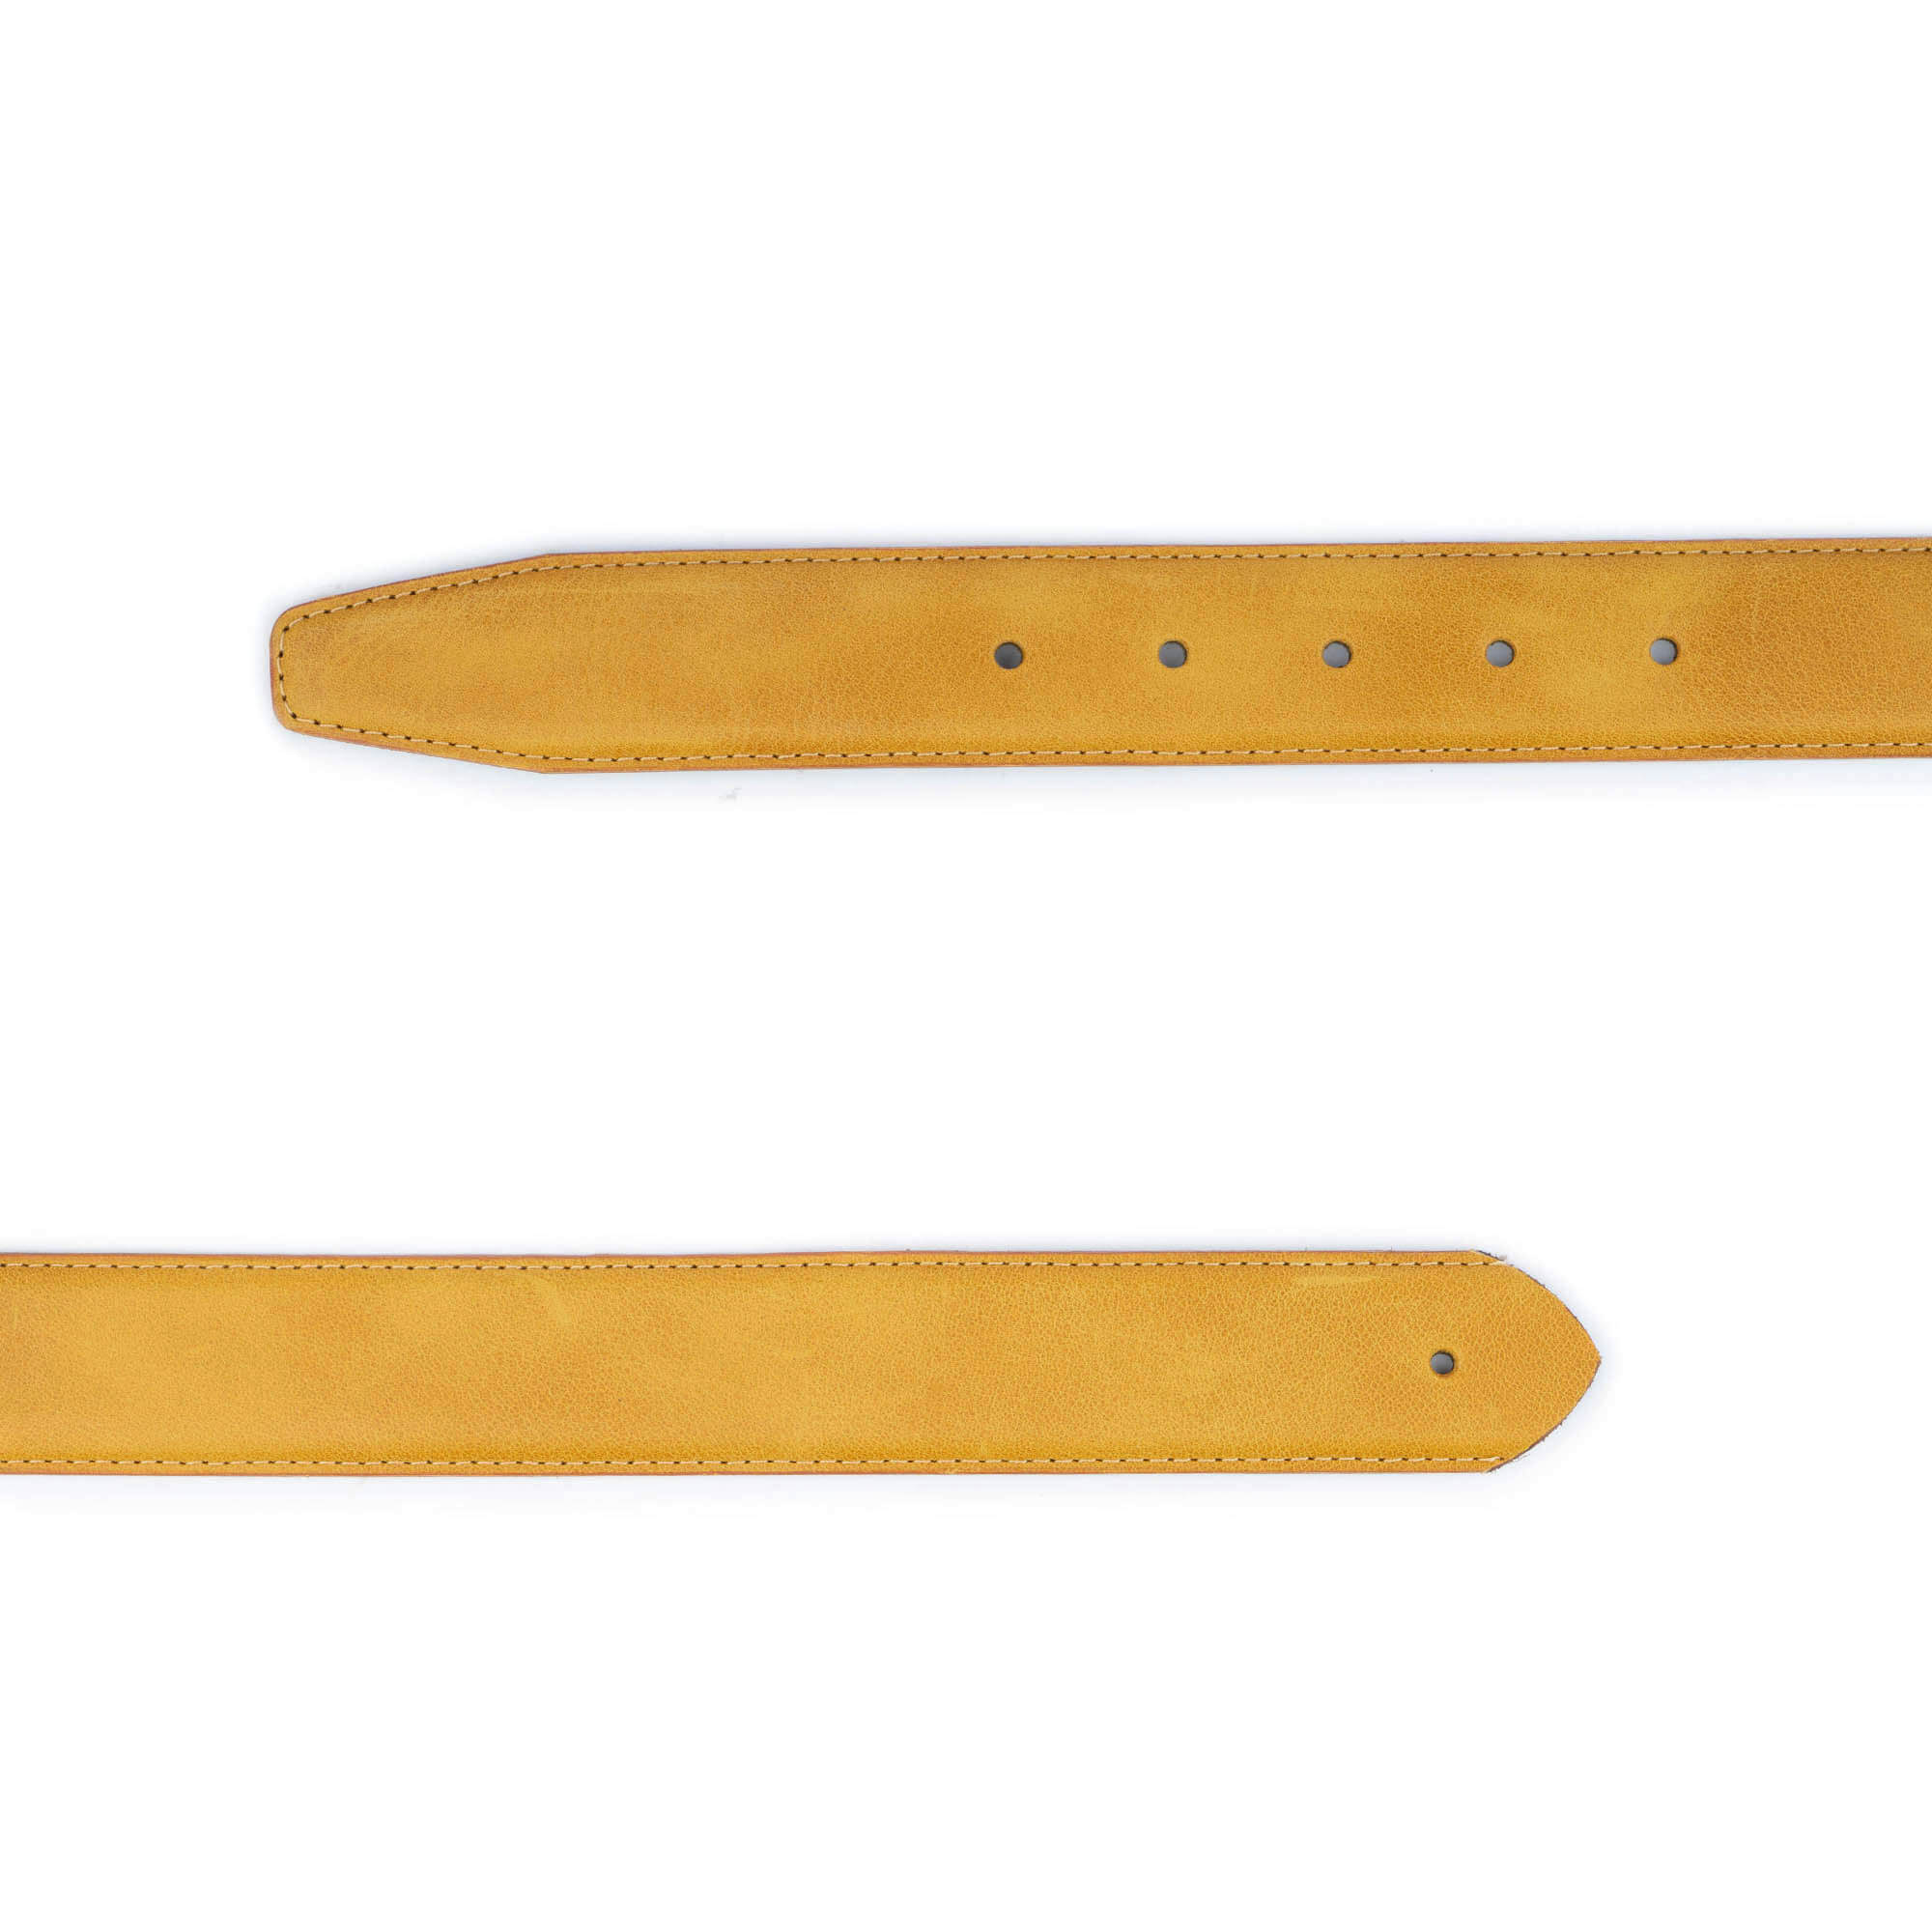 Buy Mustard Yellow Leather Belt Strap Without Buckle ...